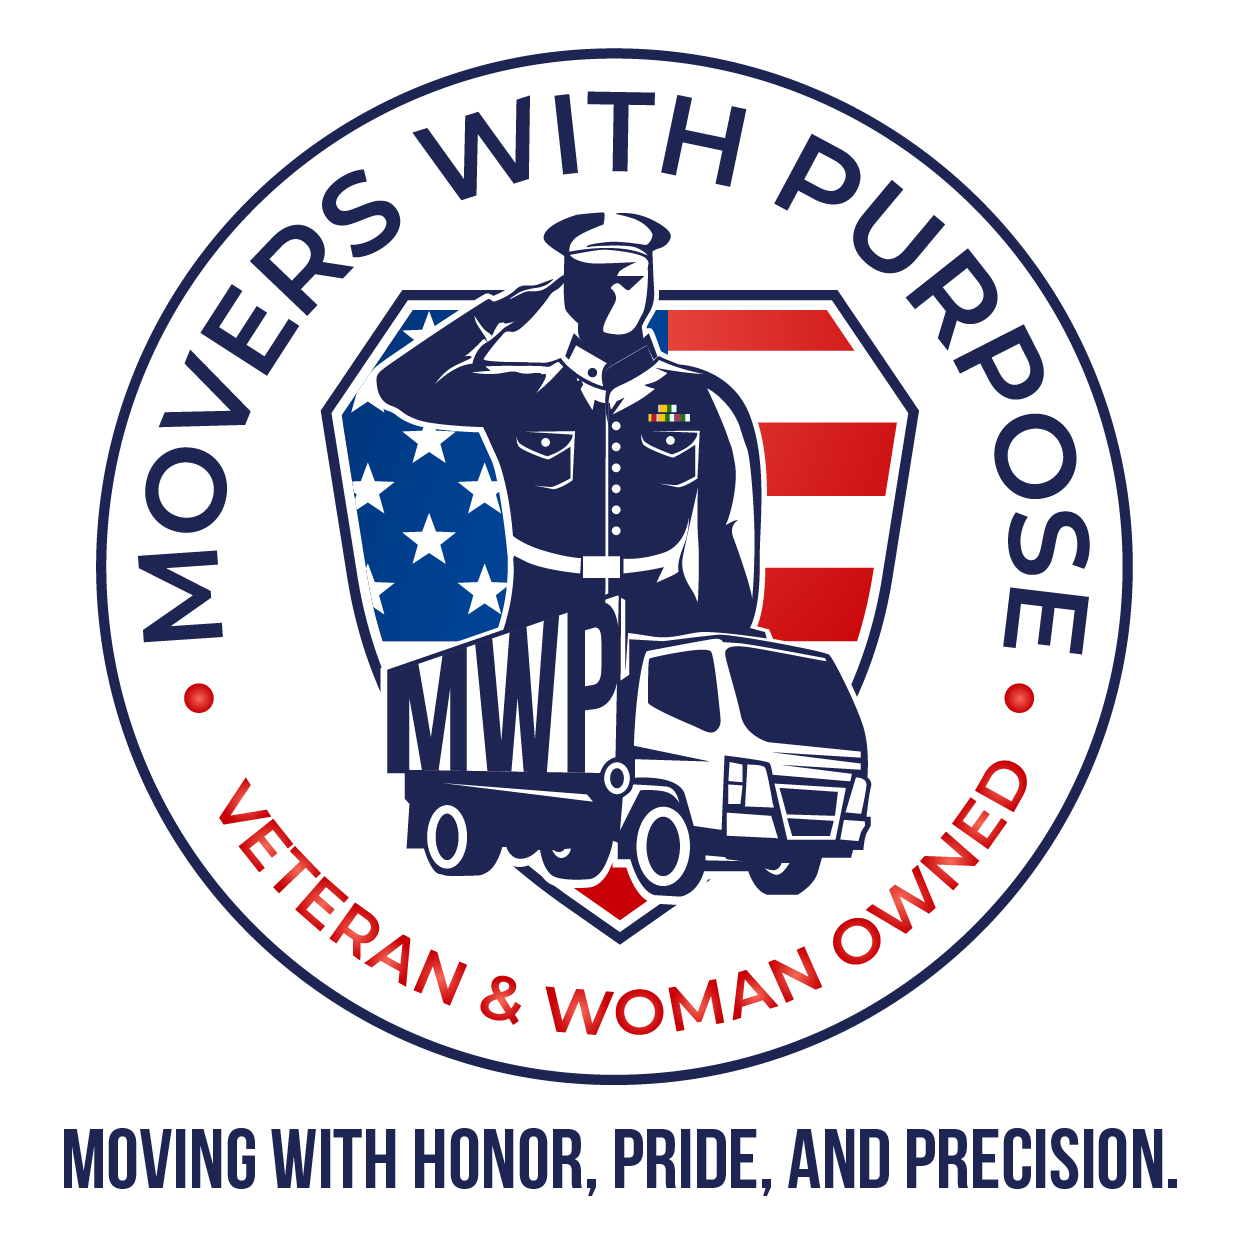 Movers With Purpose